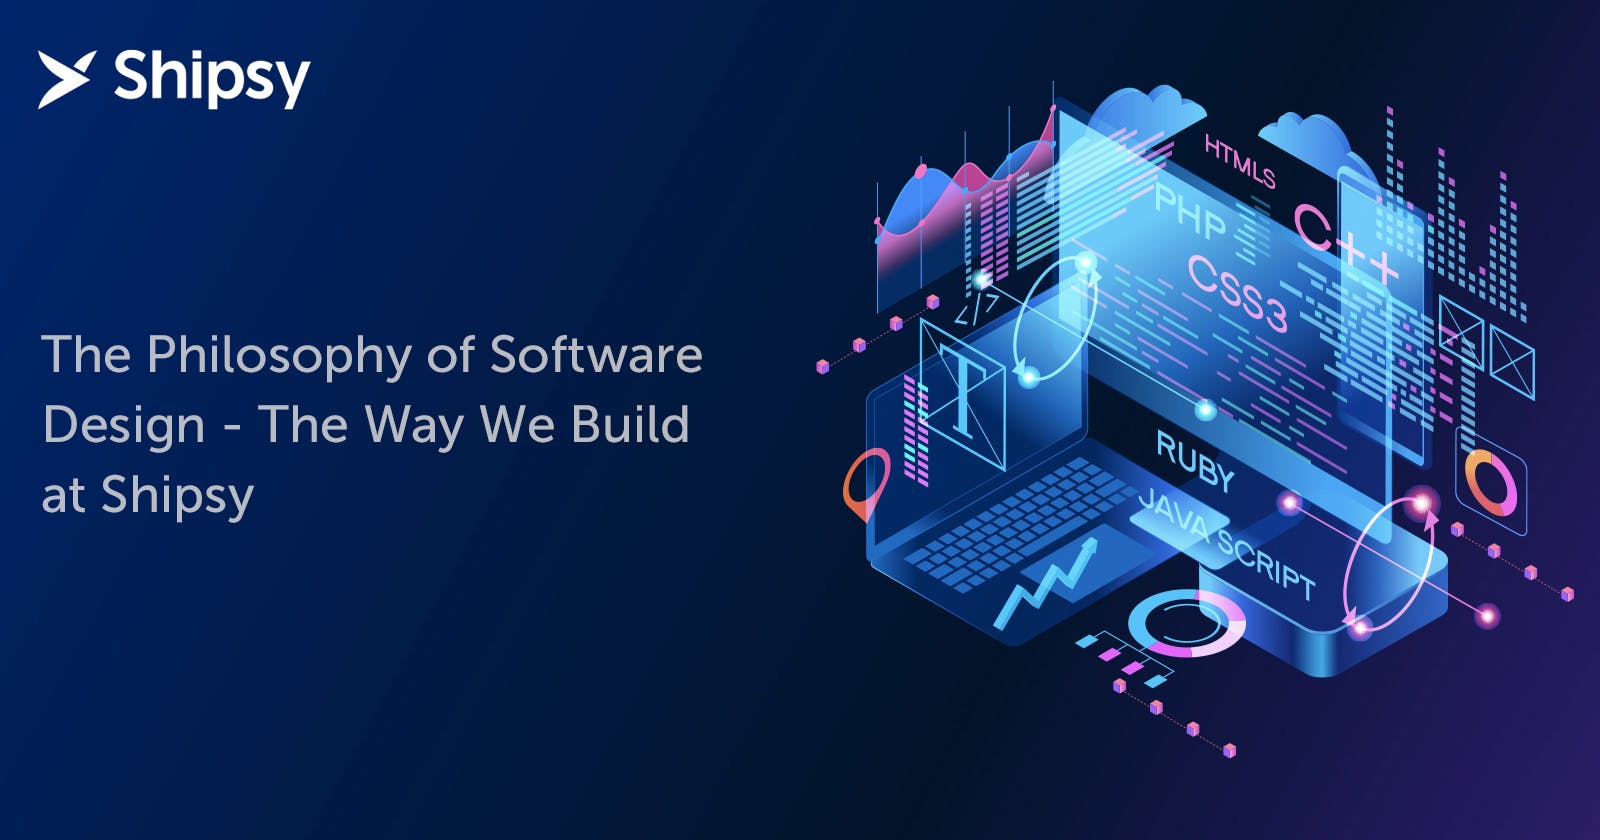 The Philosophy of Software Design - The Way We Build at Shipsy